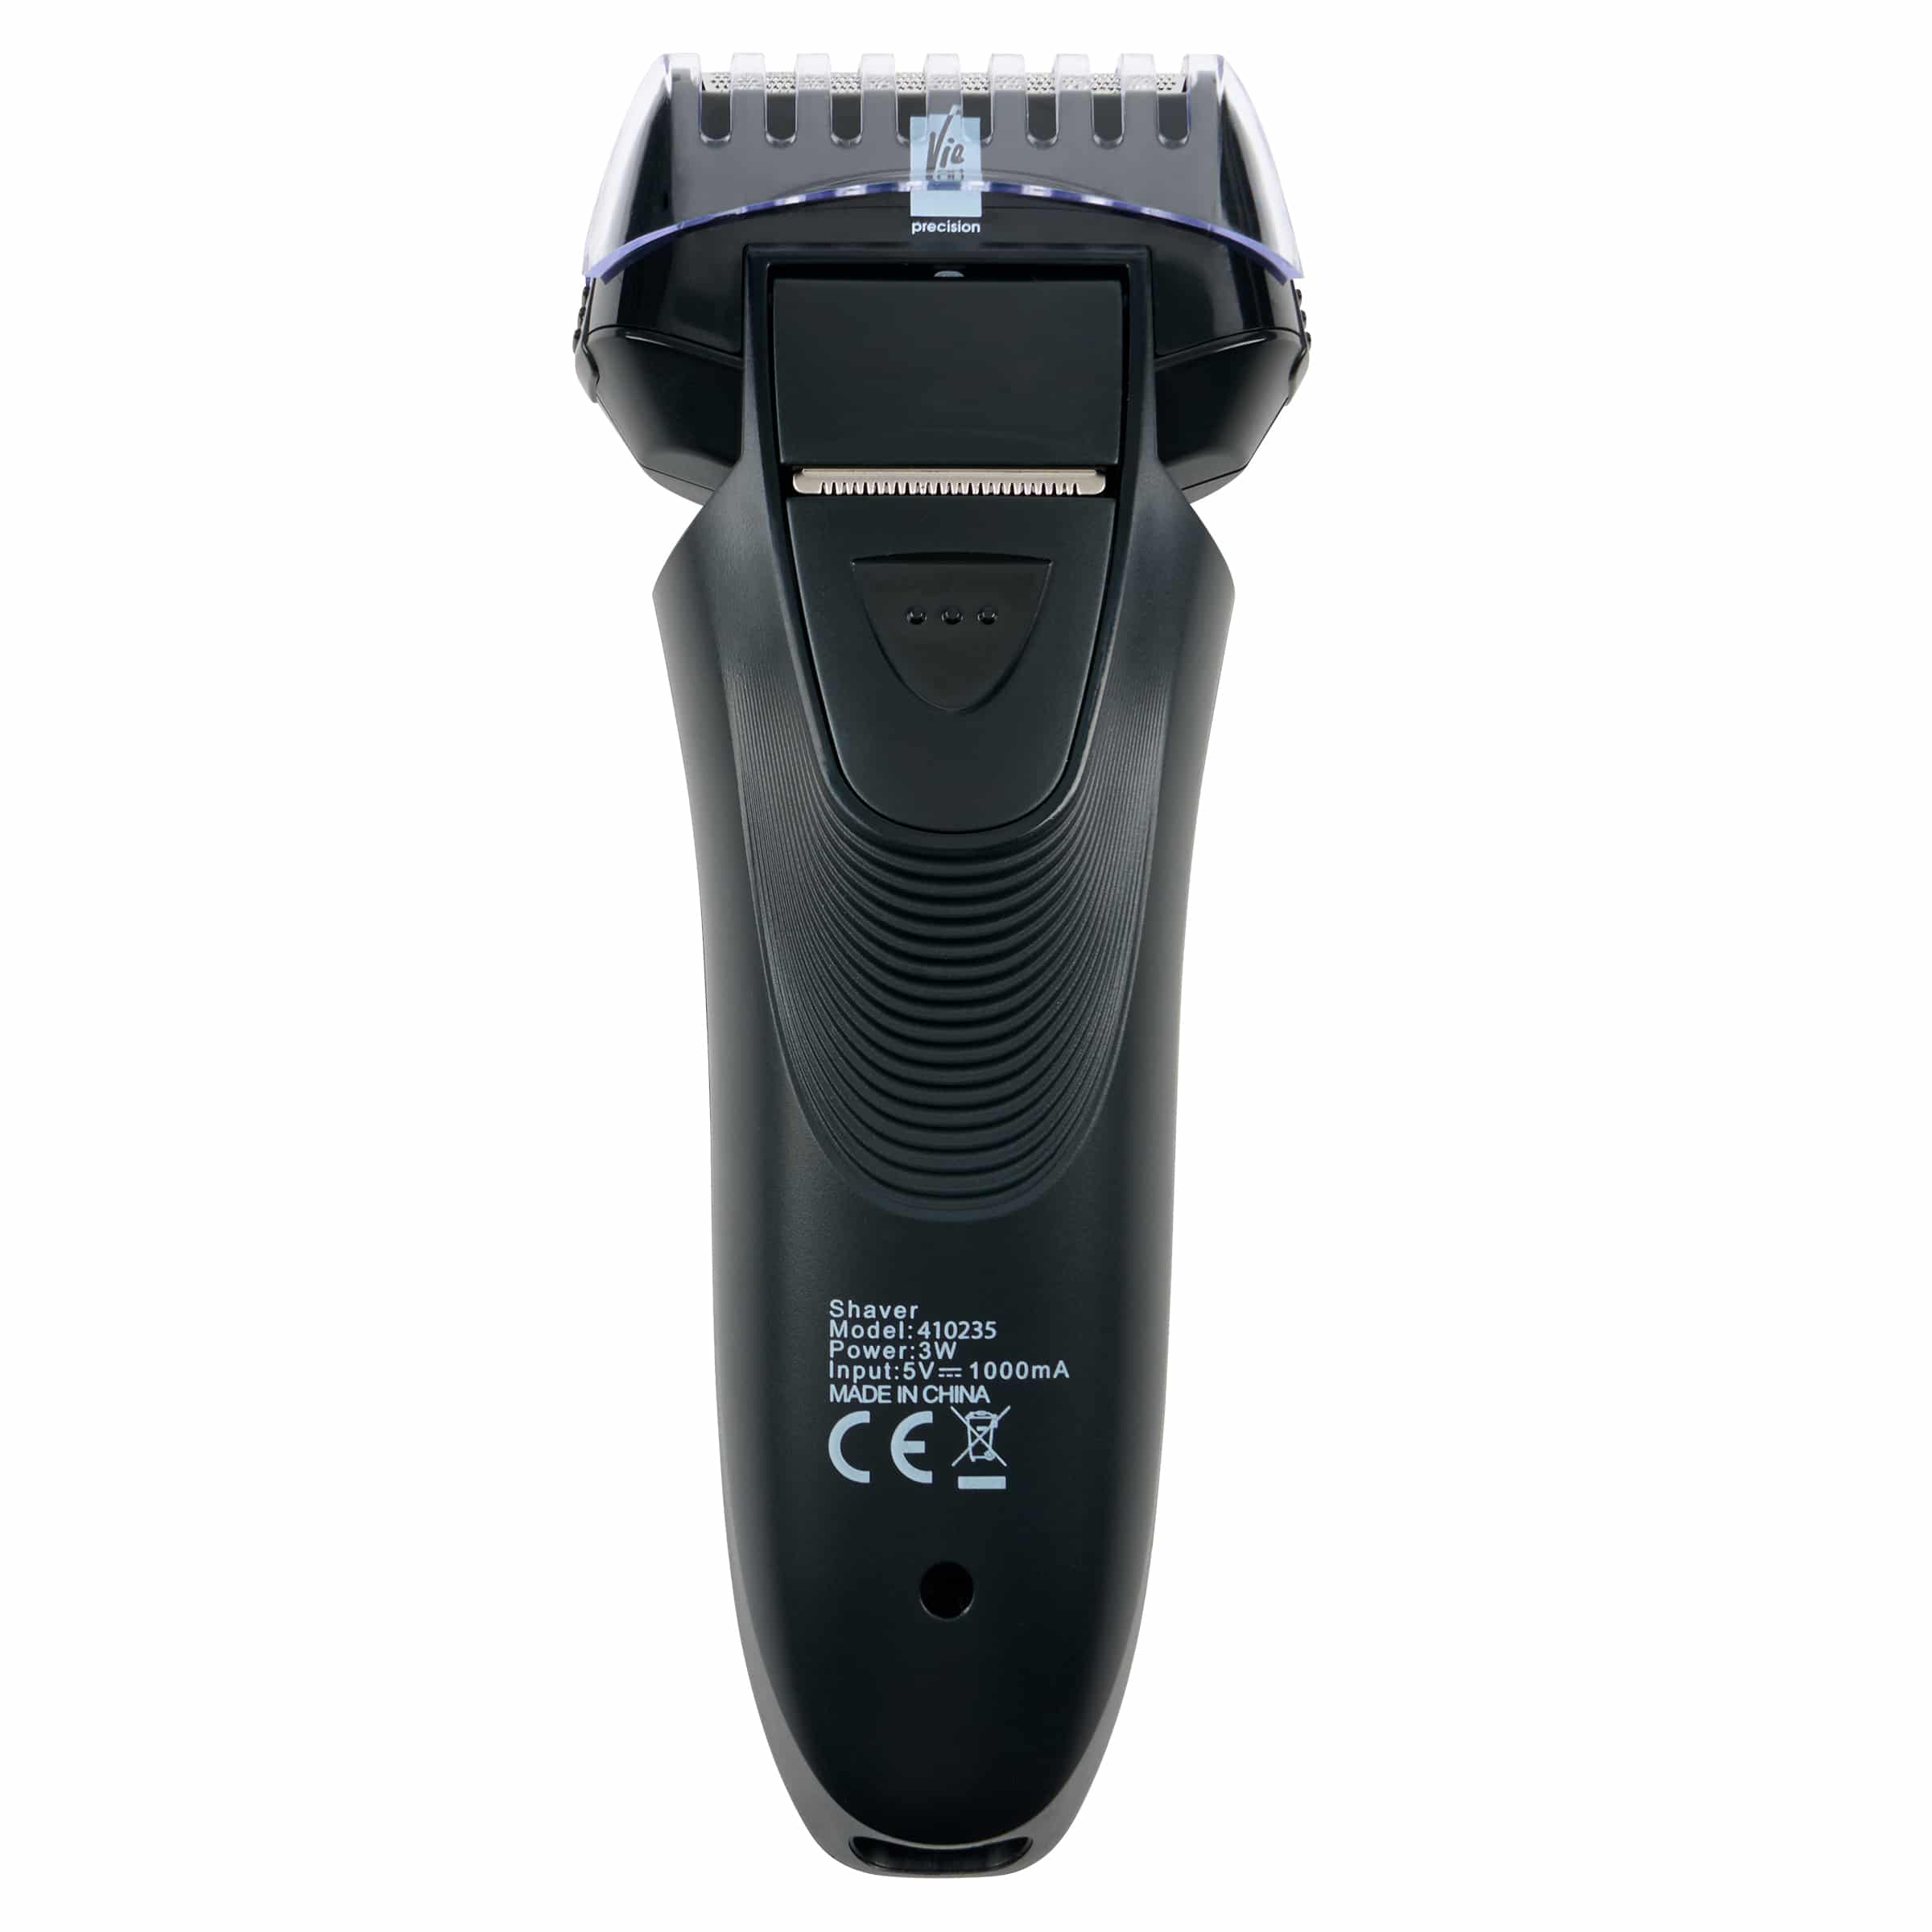 Cordless rechargeable shaver – wet or dry usage